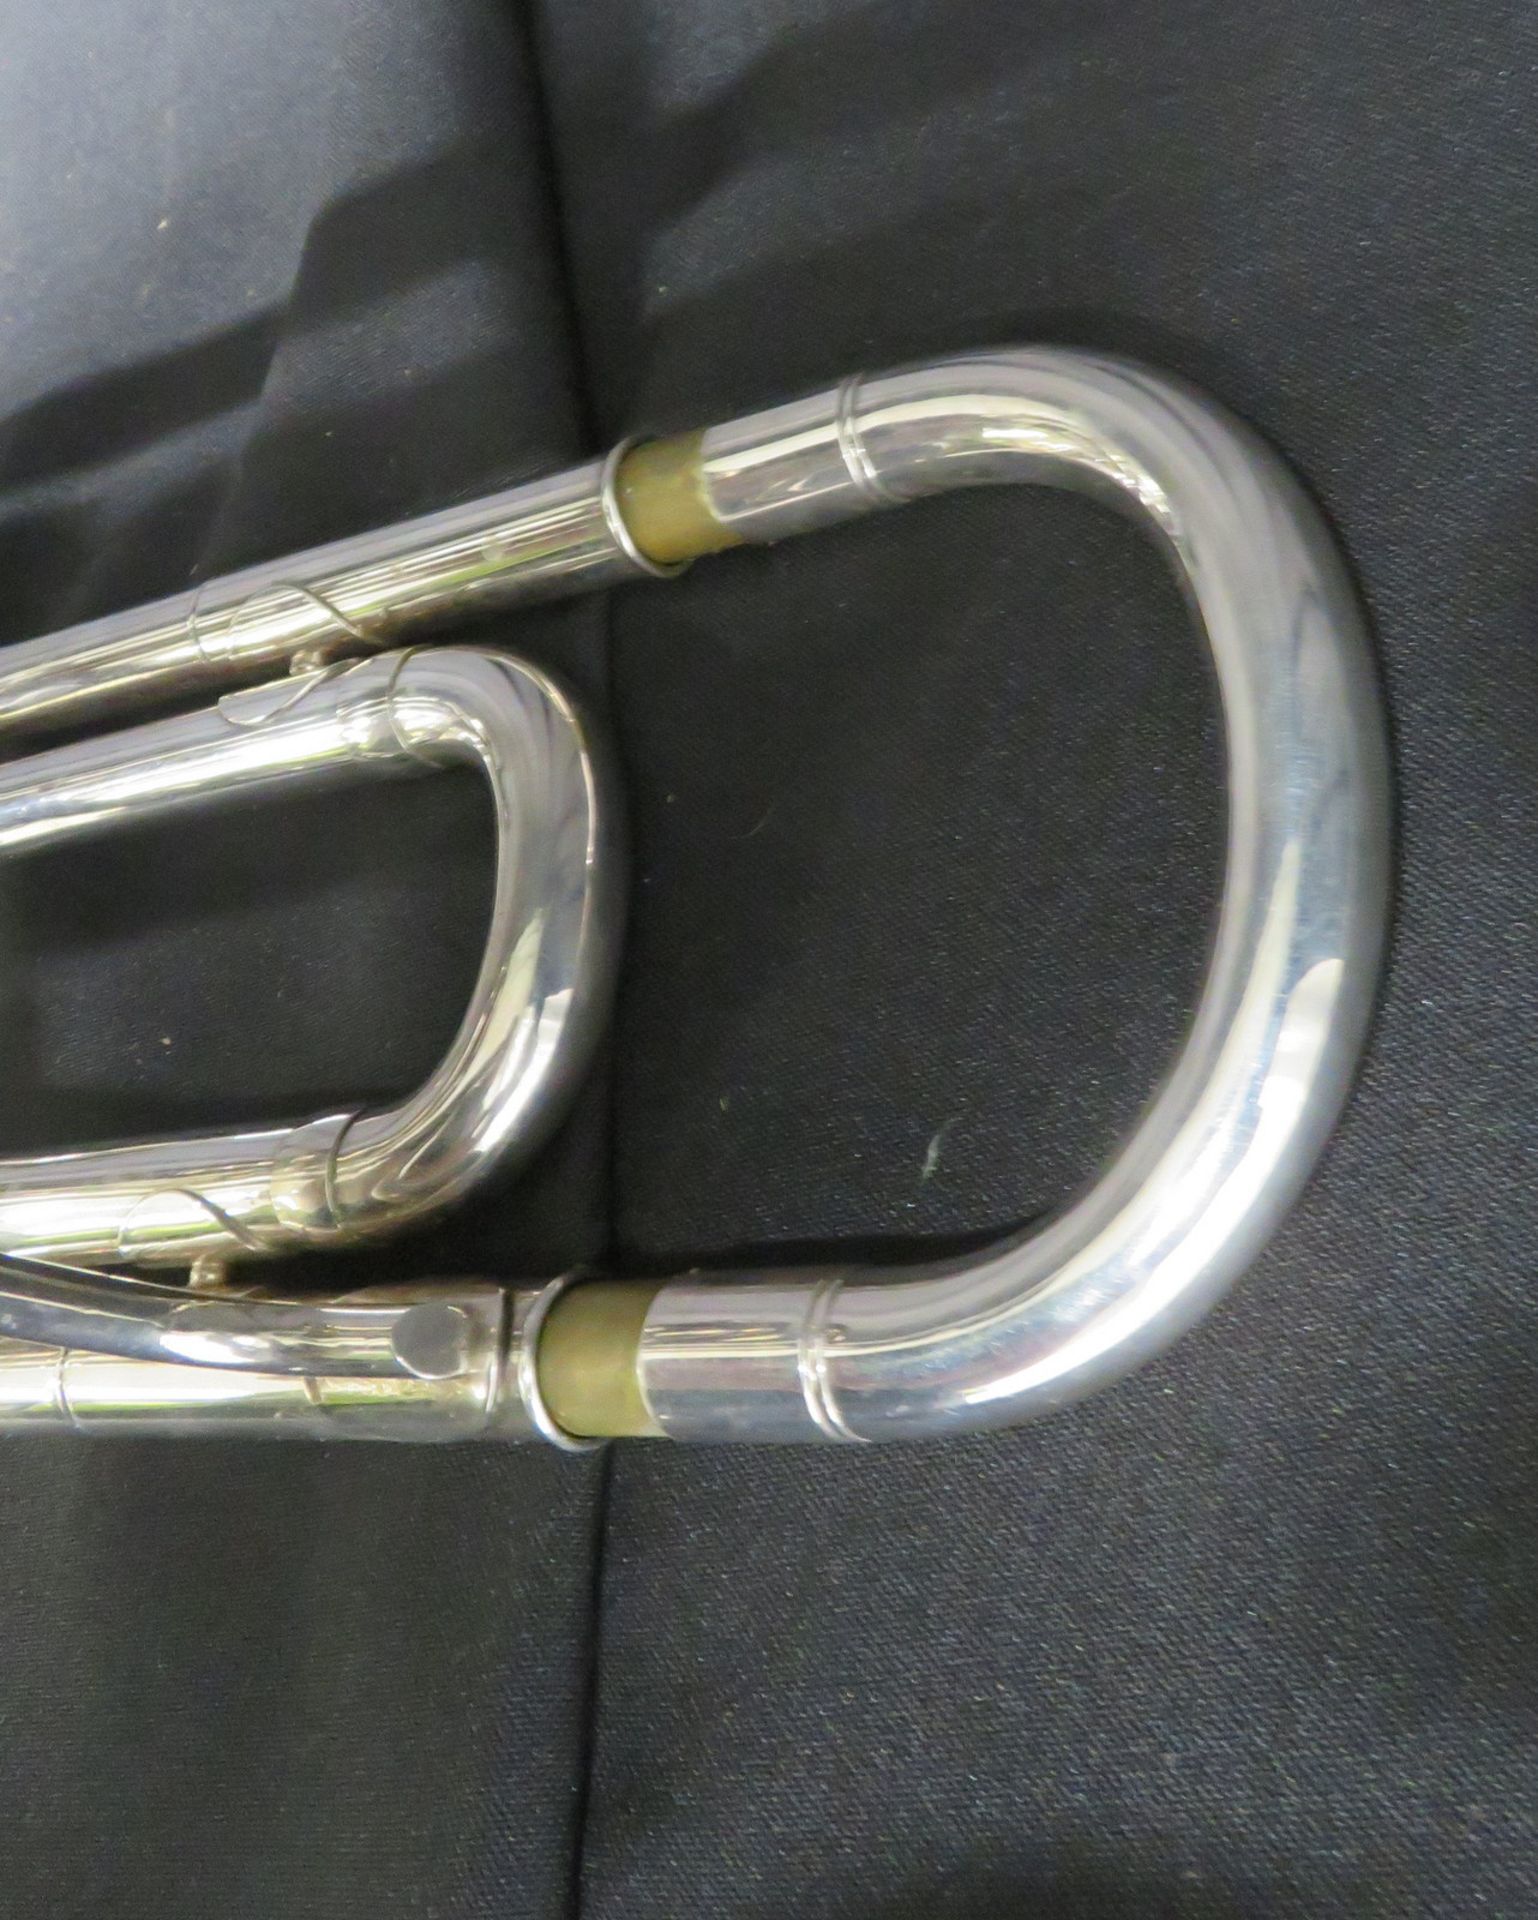 Boosey & Hawkes Besson 700 London tenor fanfare trumpet with case. Serial number: 707-721126. - Image 14 of 18